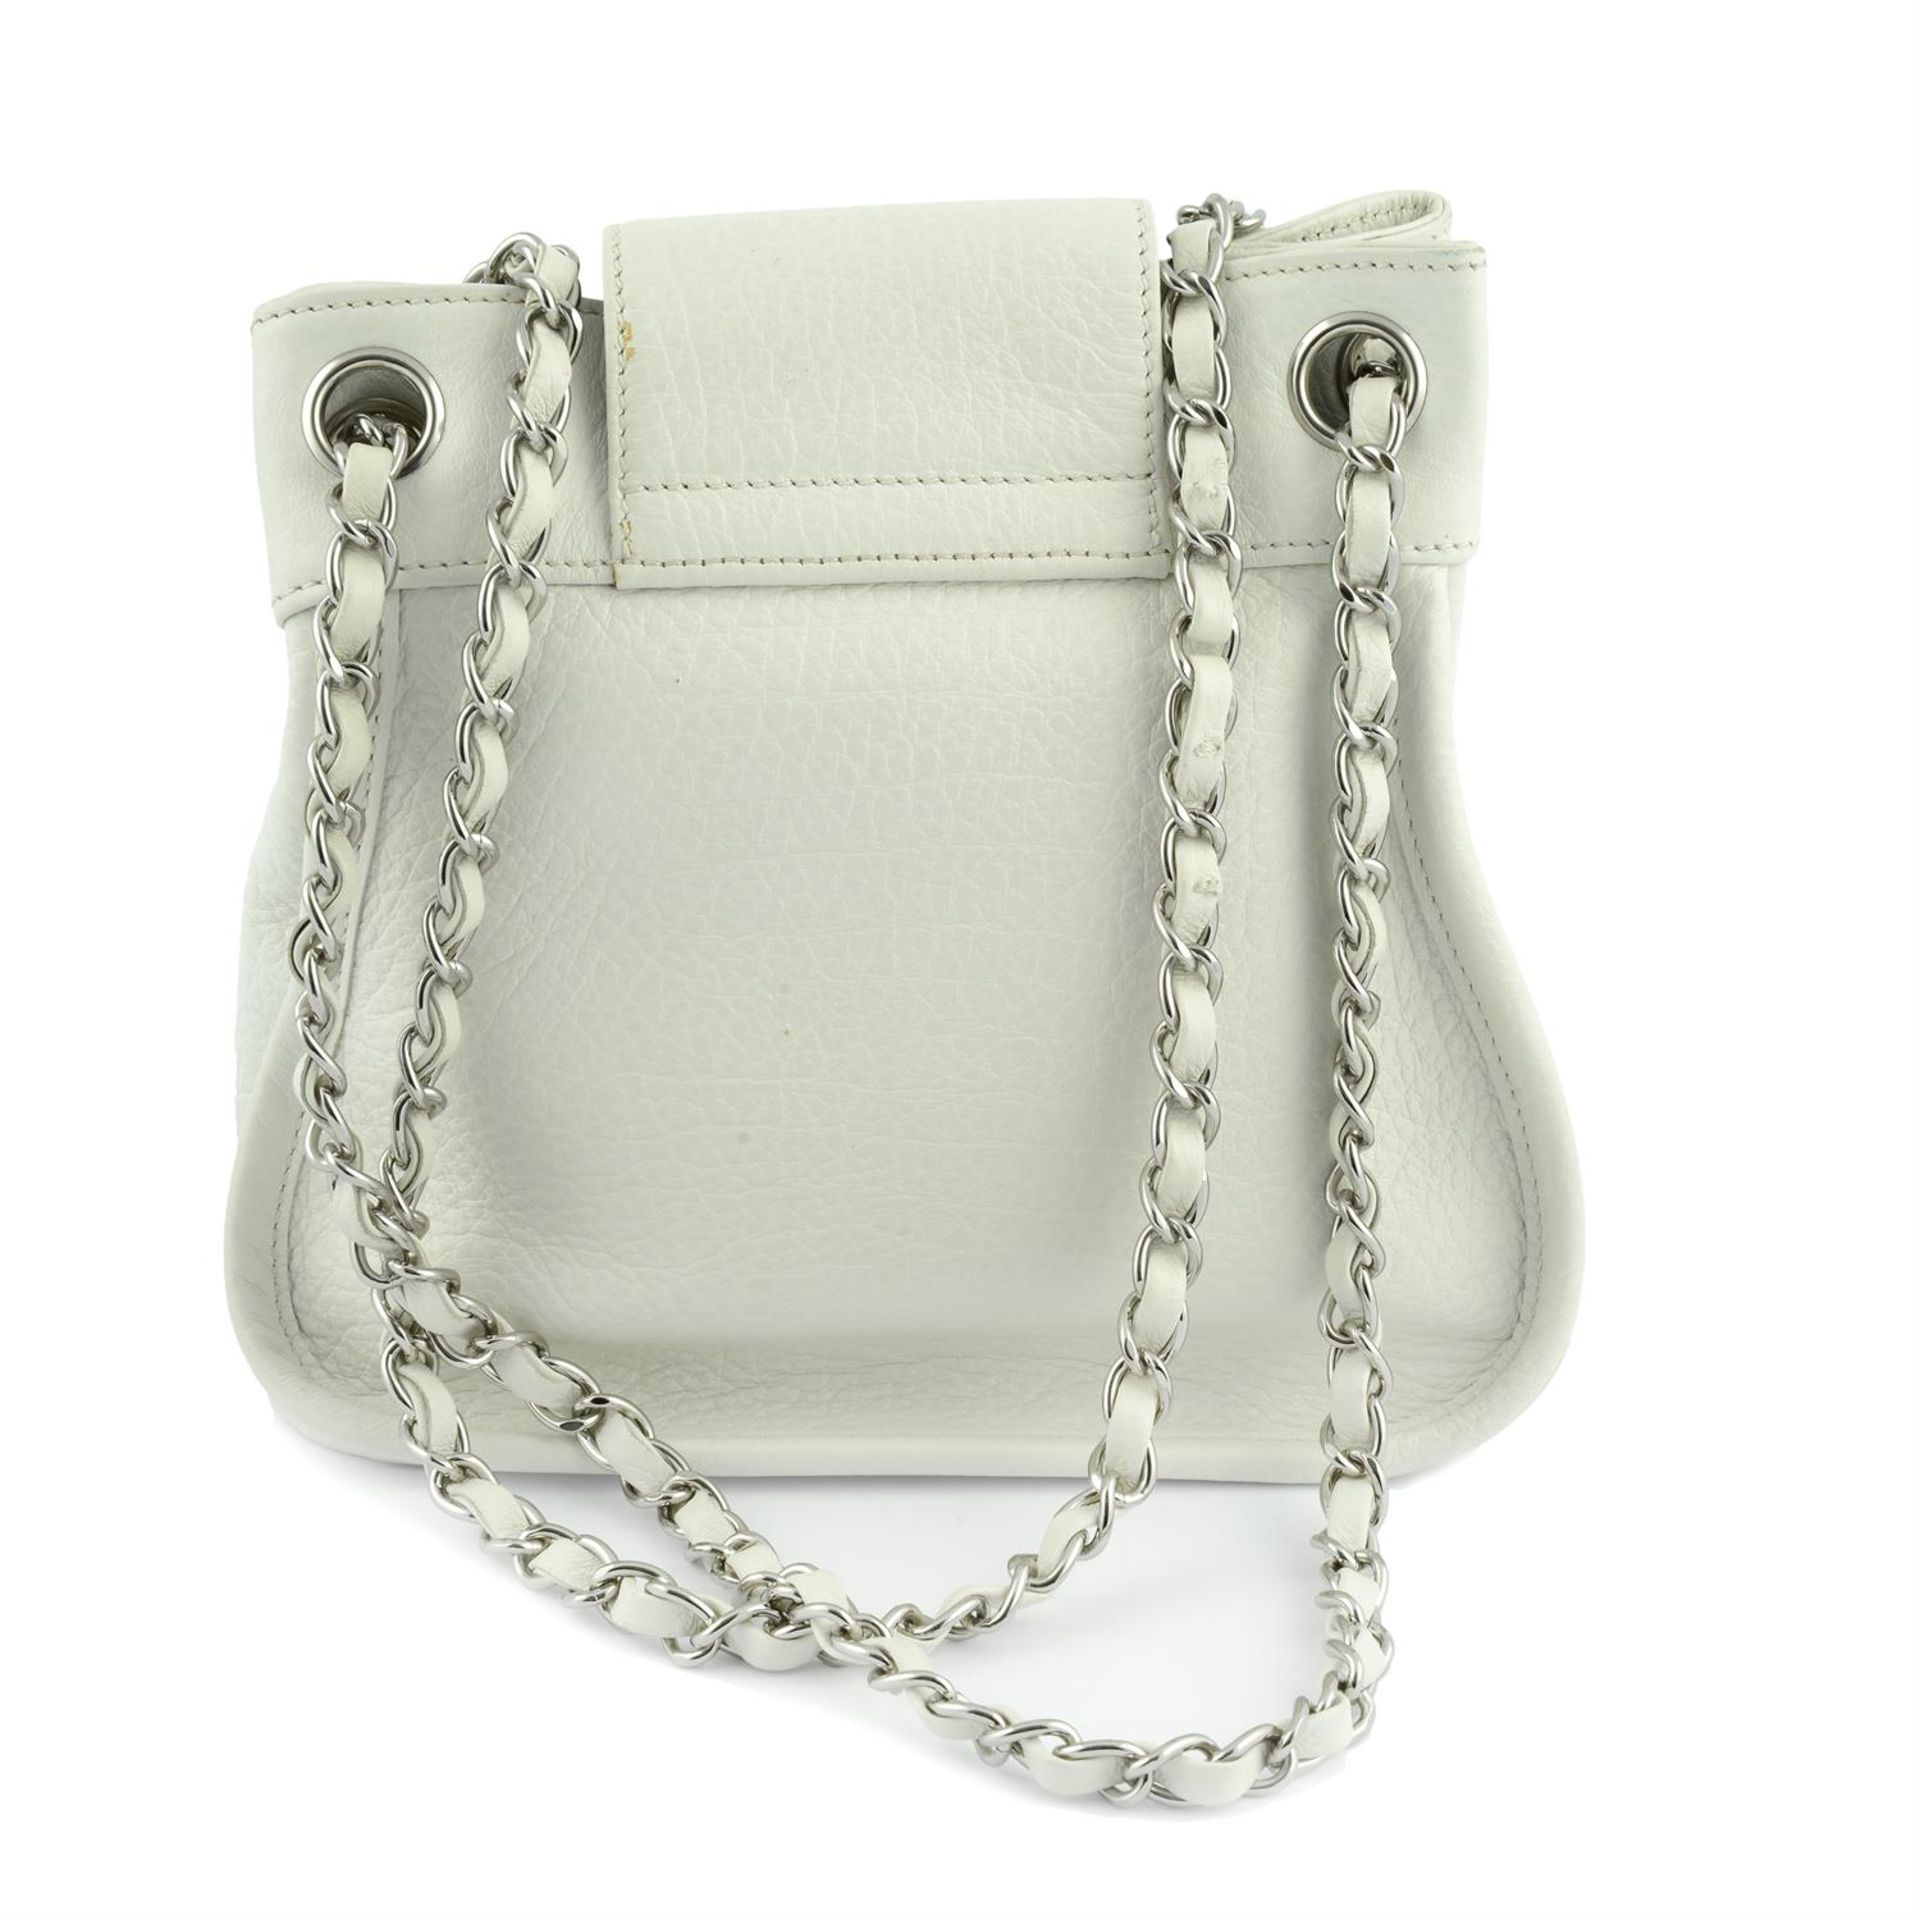 CHANEL - a 2004 white Mademoiselle Accordion Flap bag. - Image 2 of 5